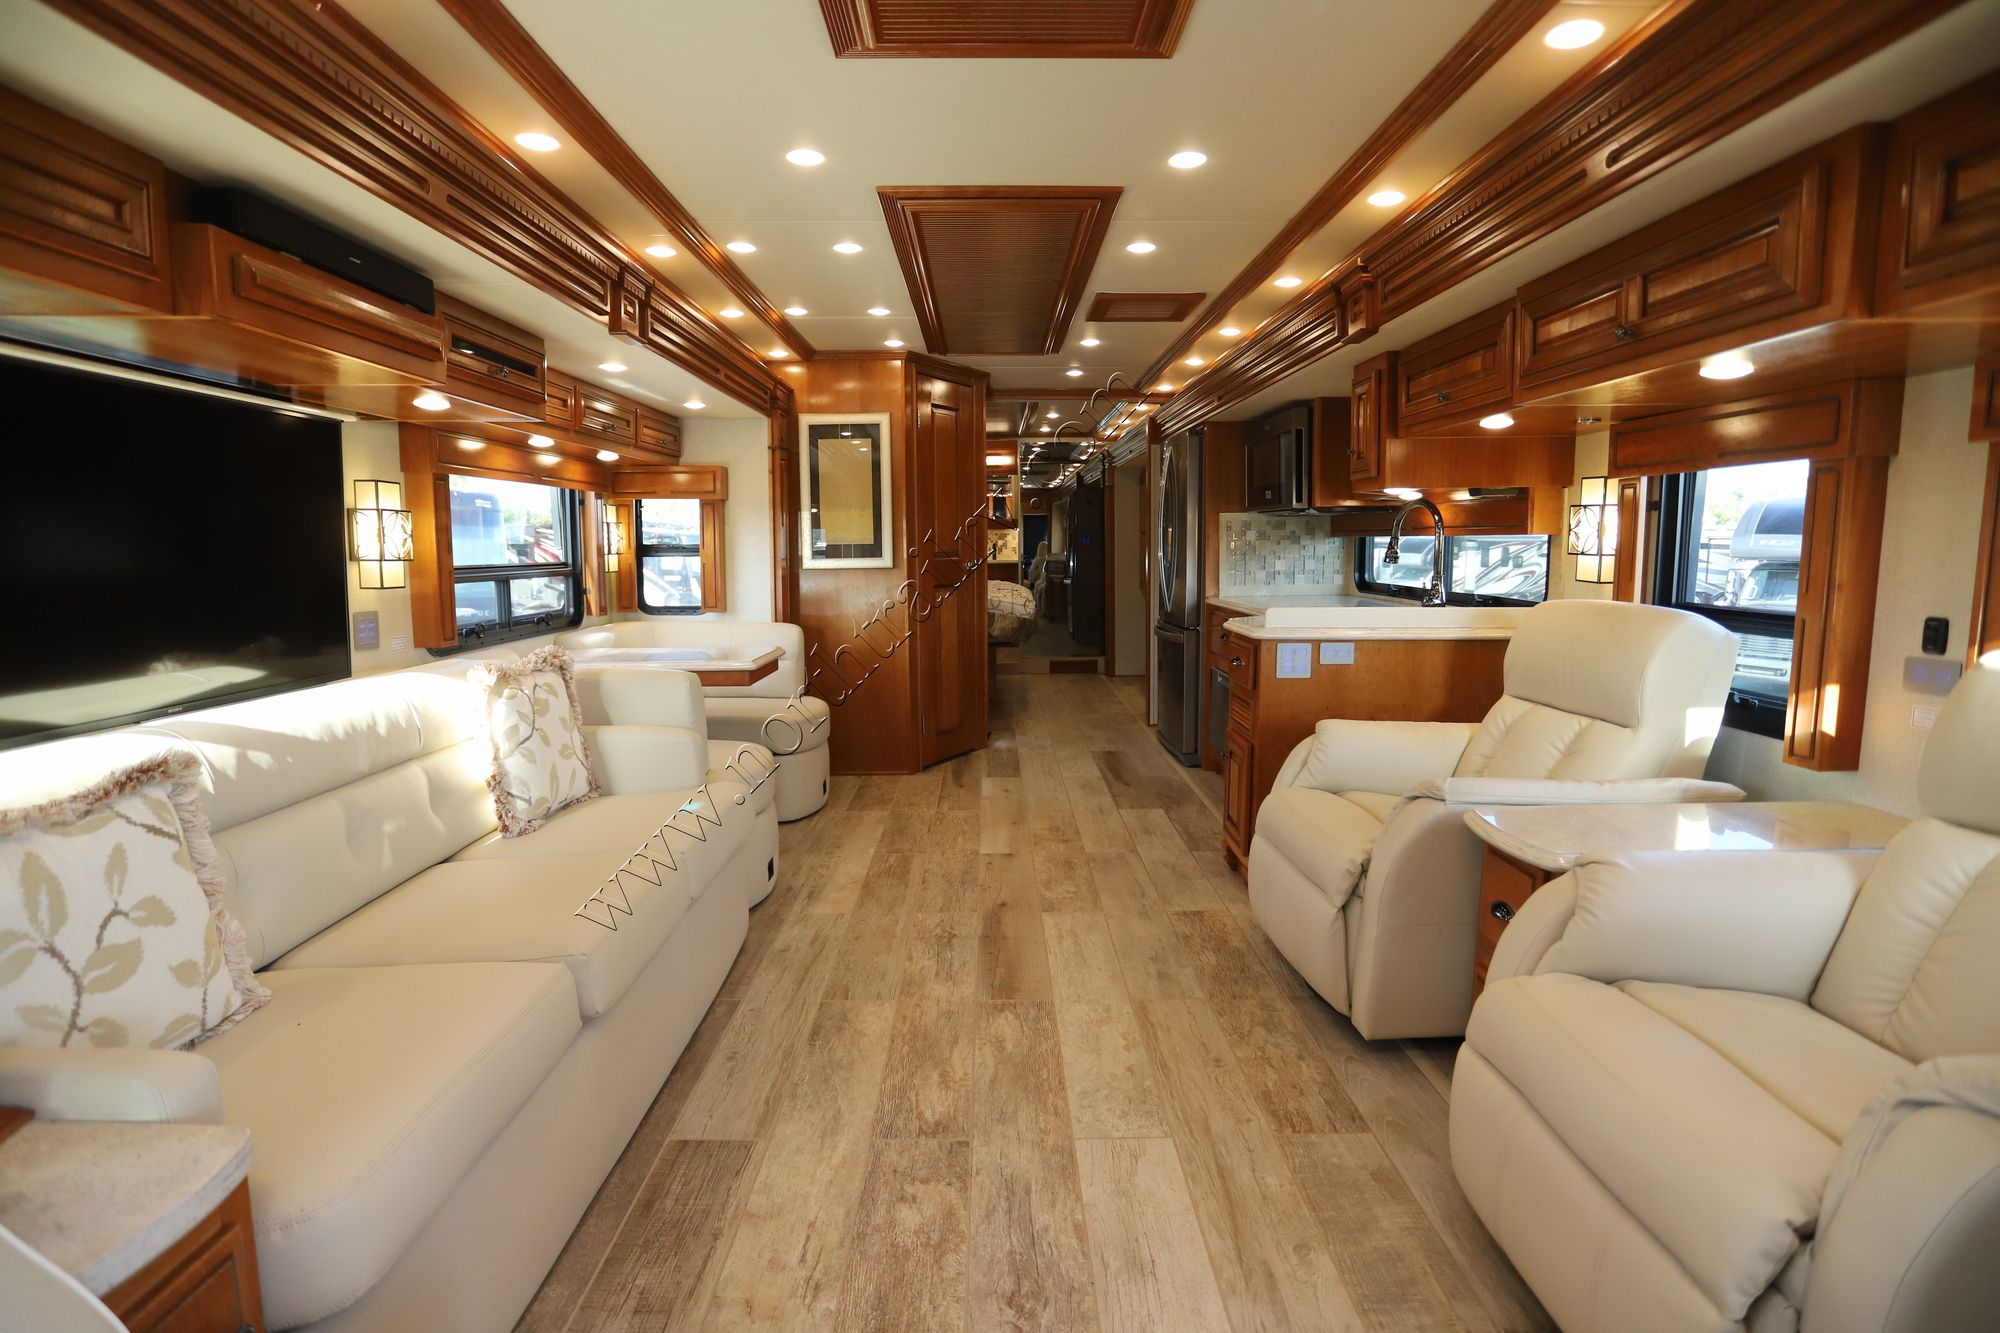 Used 2019 Newmar Dutch Star 4002 Class A  For Sale